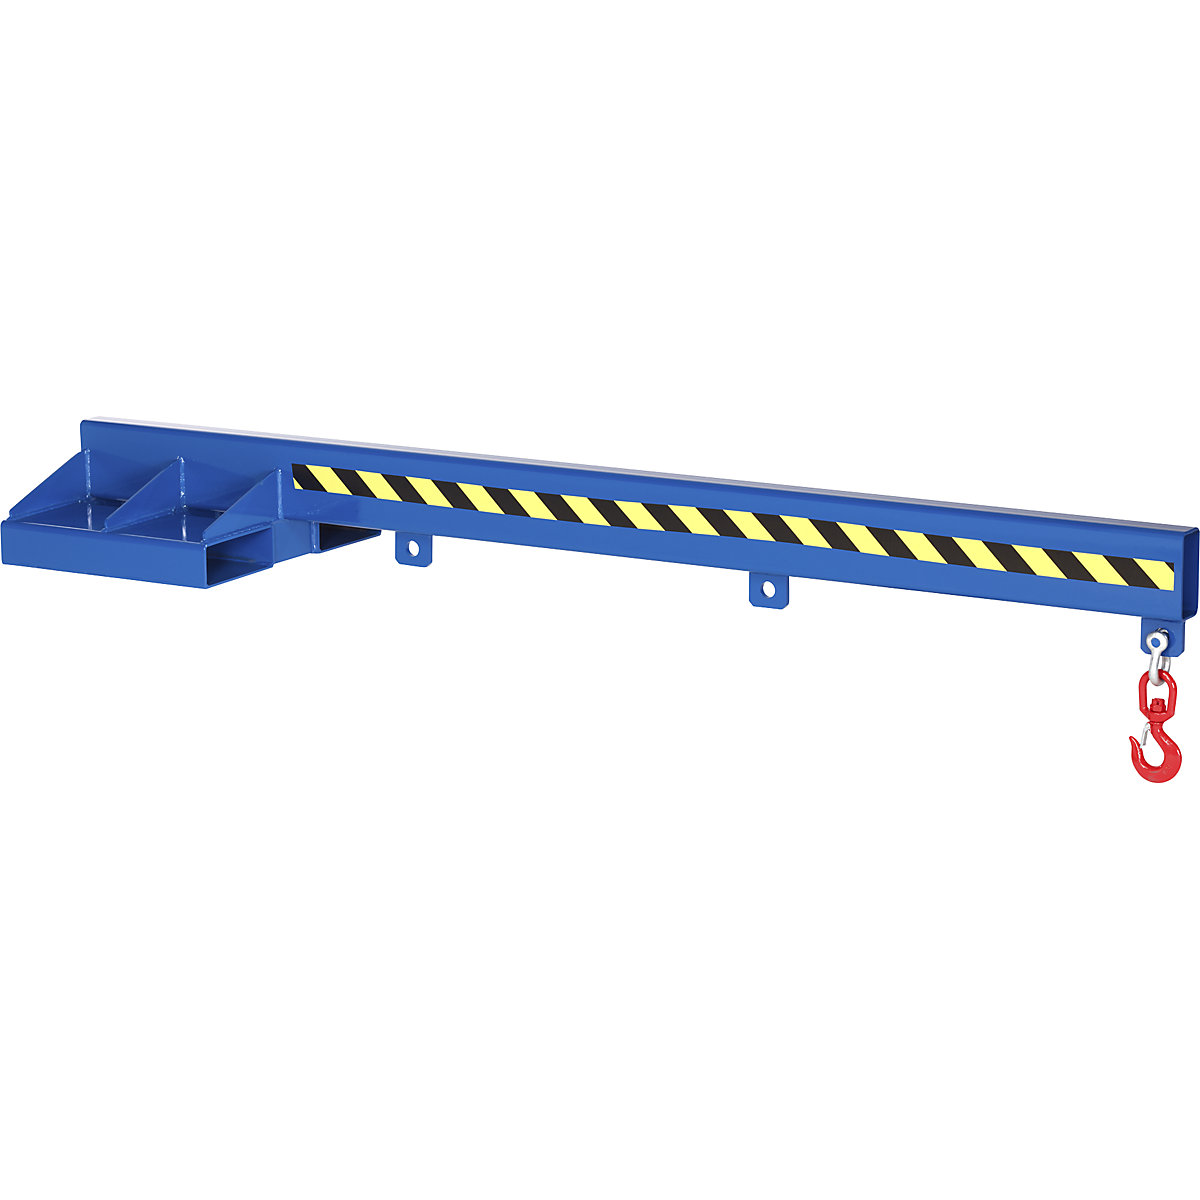 Load arm with rotating swivel hook, gentian blue RAL 5010, length 2400 mm, max. load 1000 kg